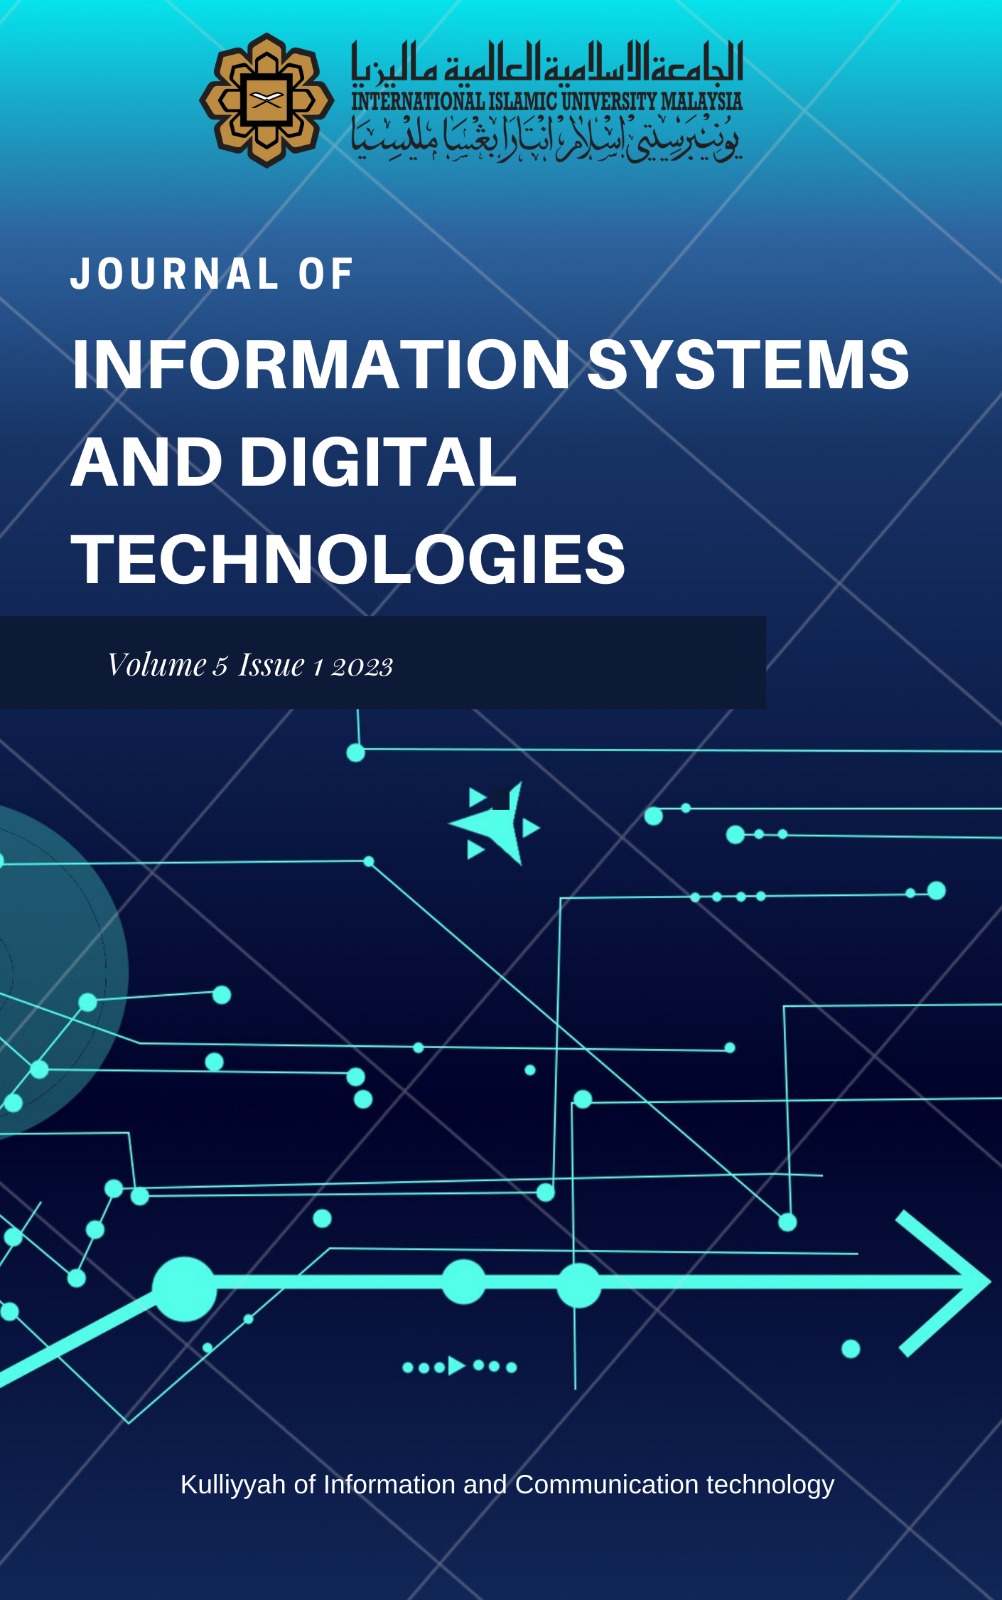 					View Vol. 5 No. No. 1 (2023): Journal of Information Systems and Digital Technologies
				